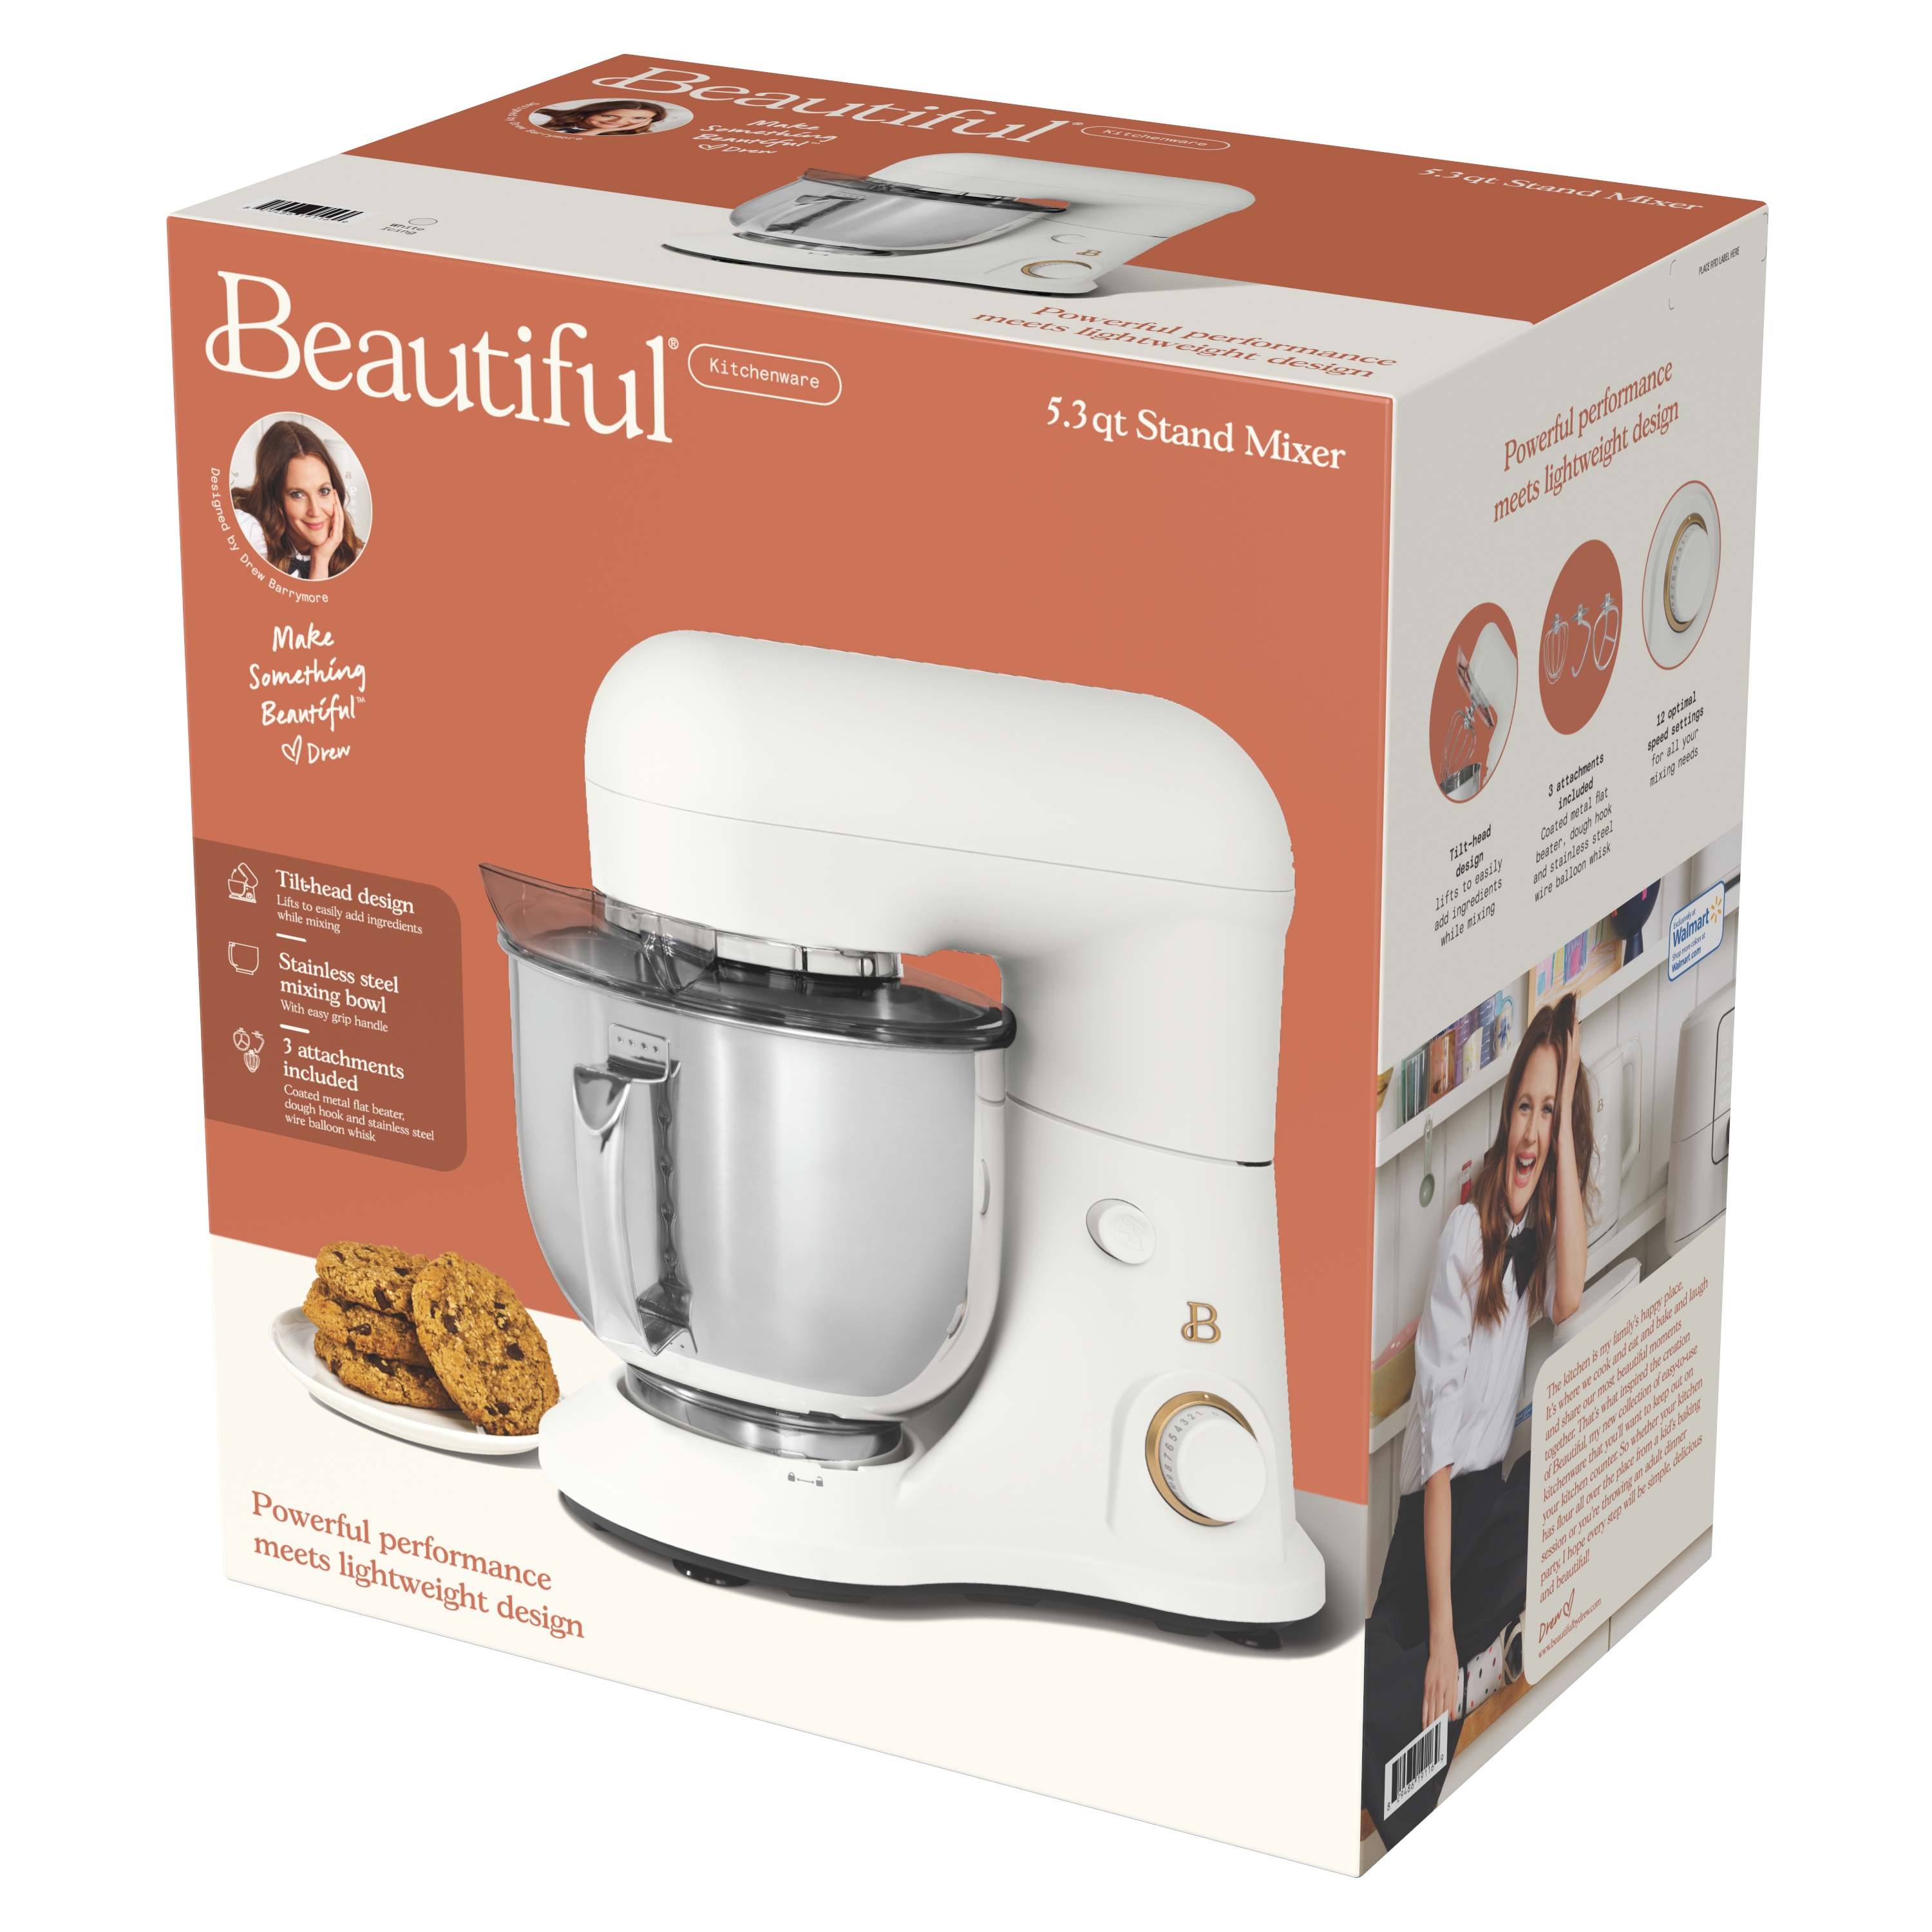 Beautiful 5.3 Qt Stand Mixer, Lightweight & Powerful with Tilt-Head, White Icing by Drew Barrymore - image 3 of 16